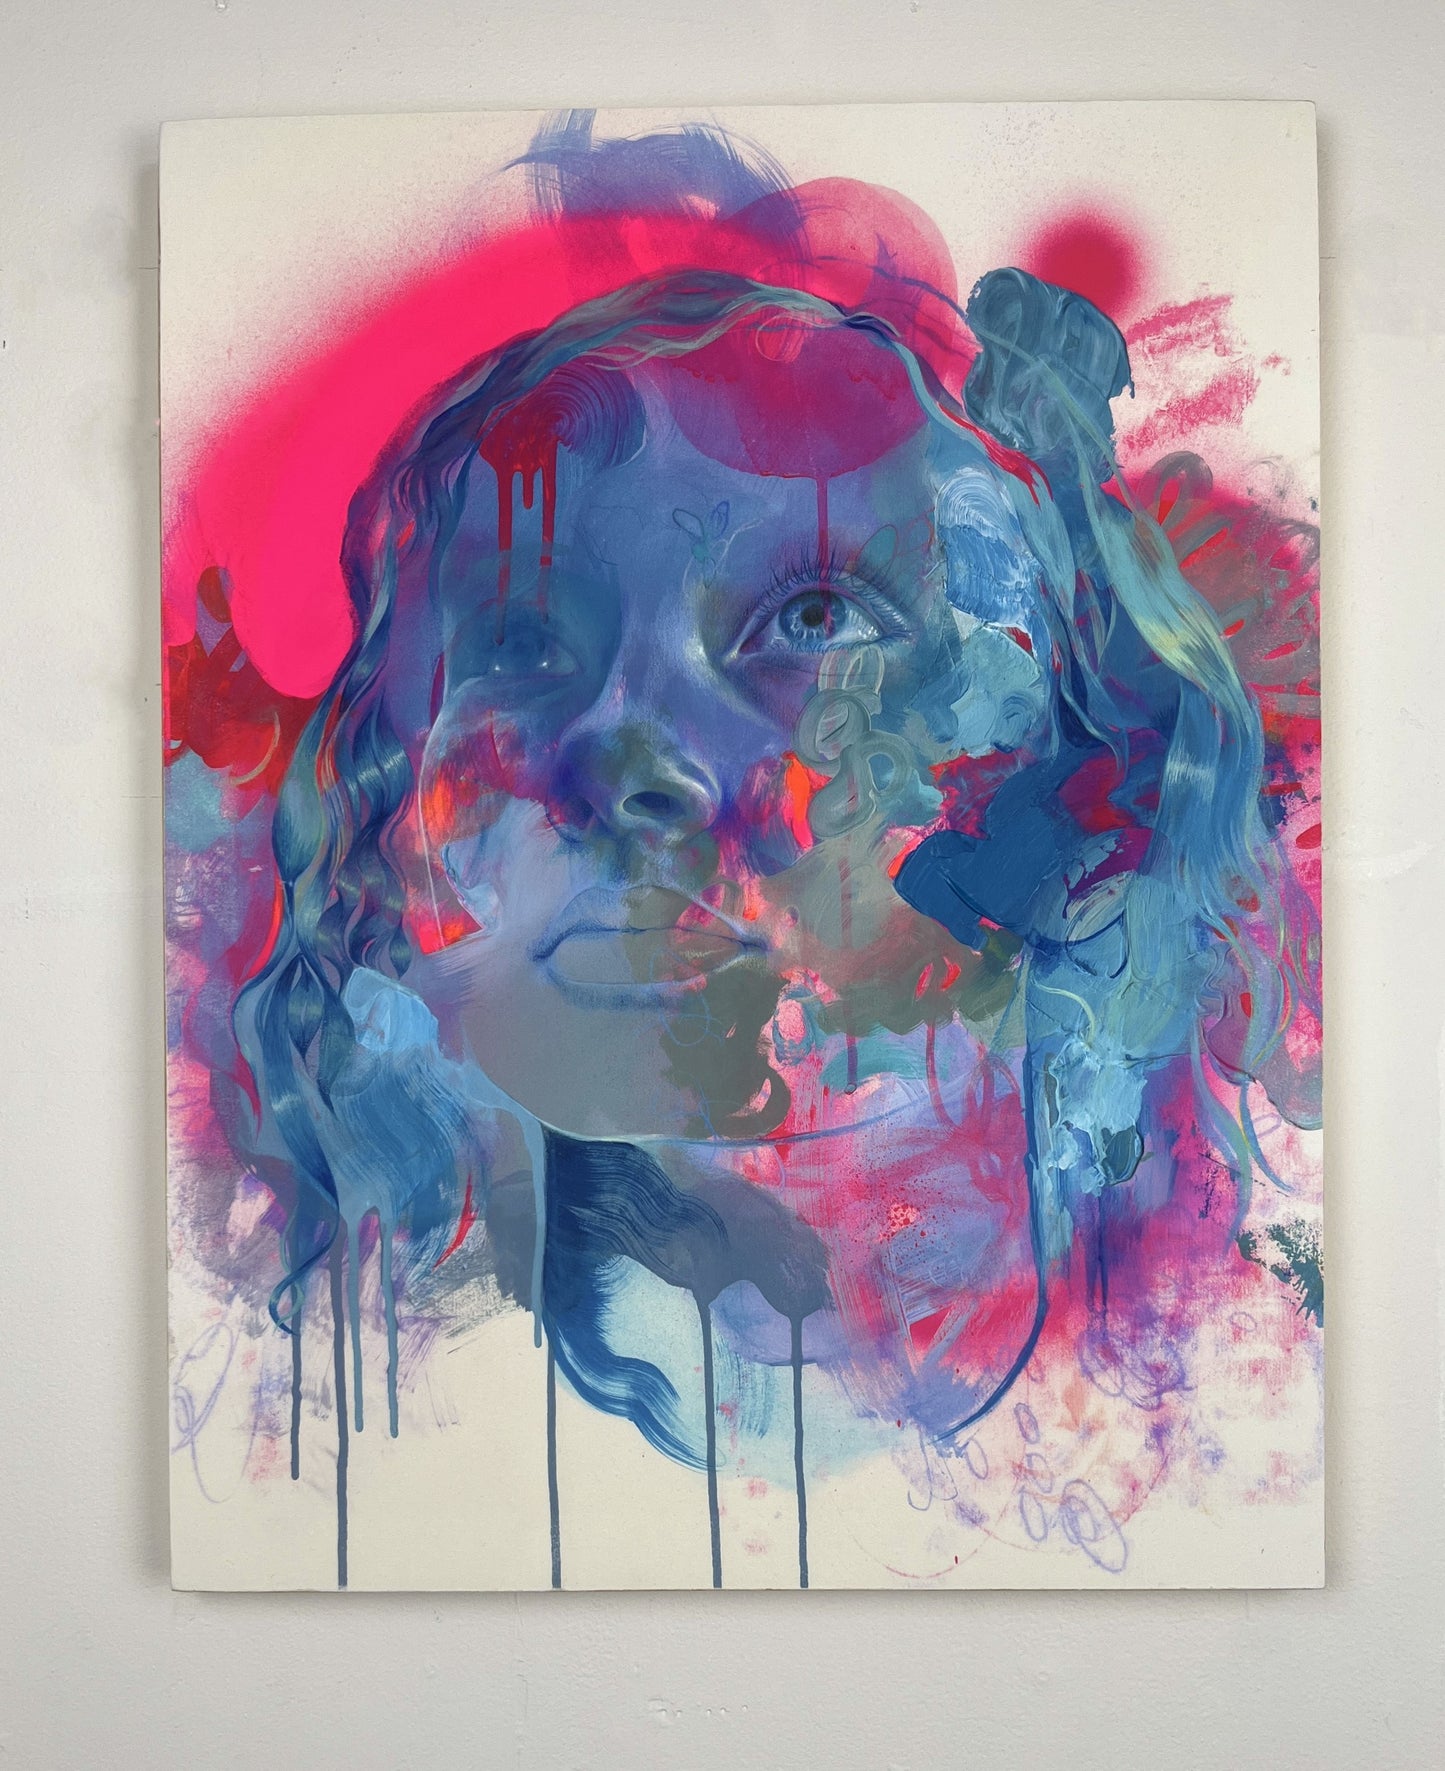 Unframed image of pink blue portrait hanging on a white wall background